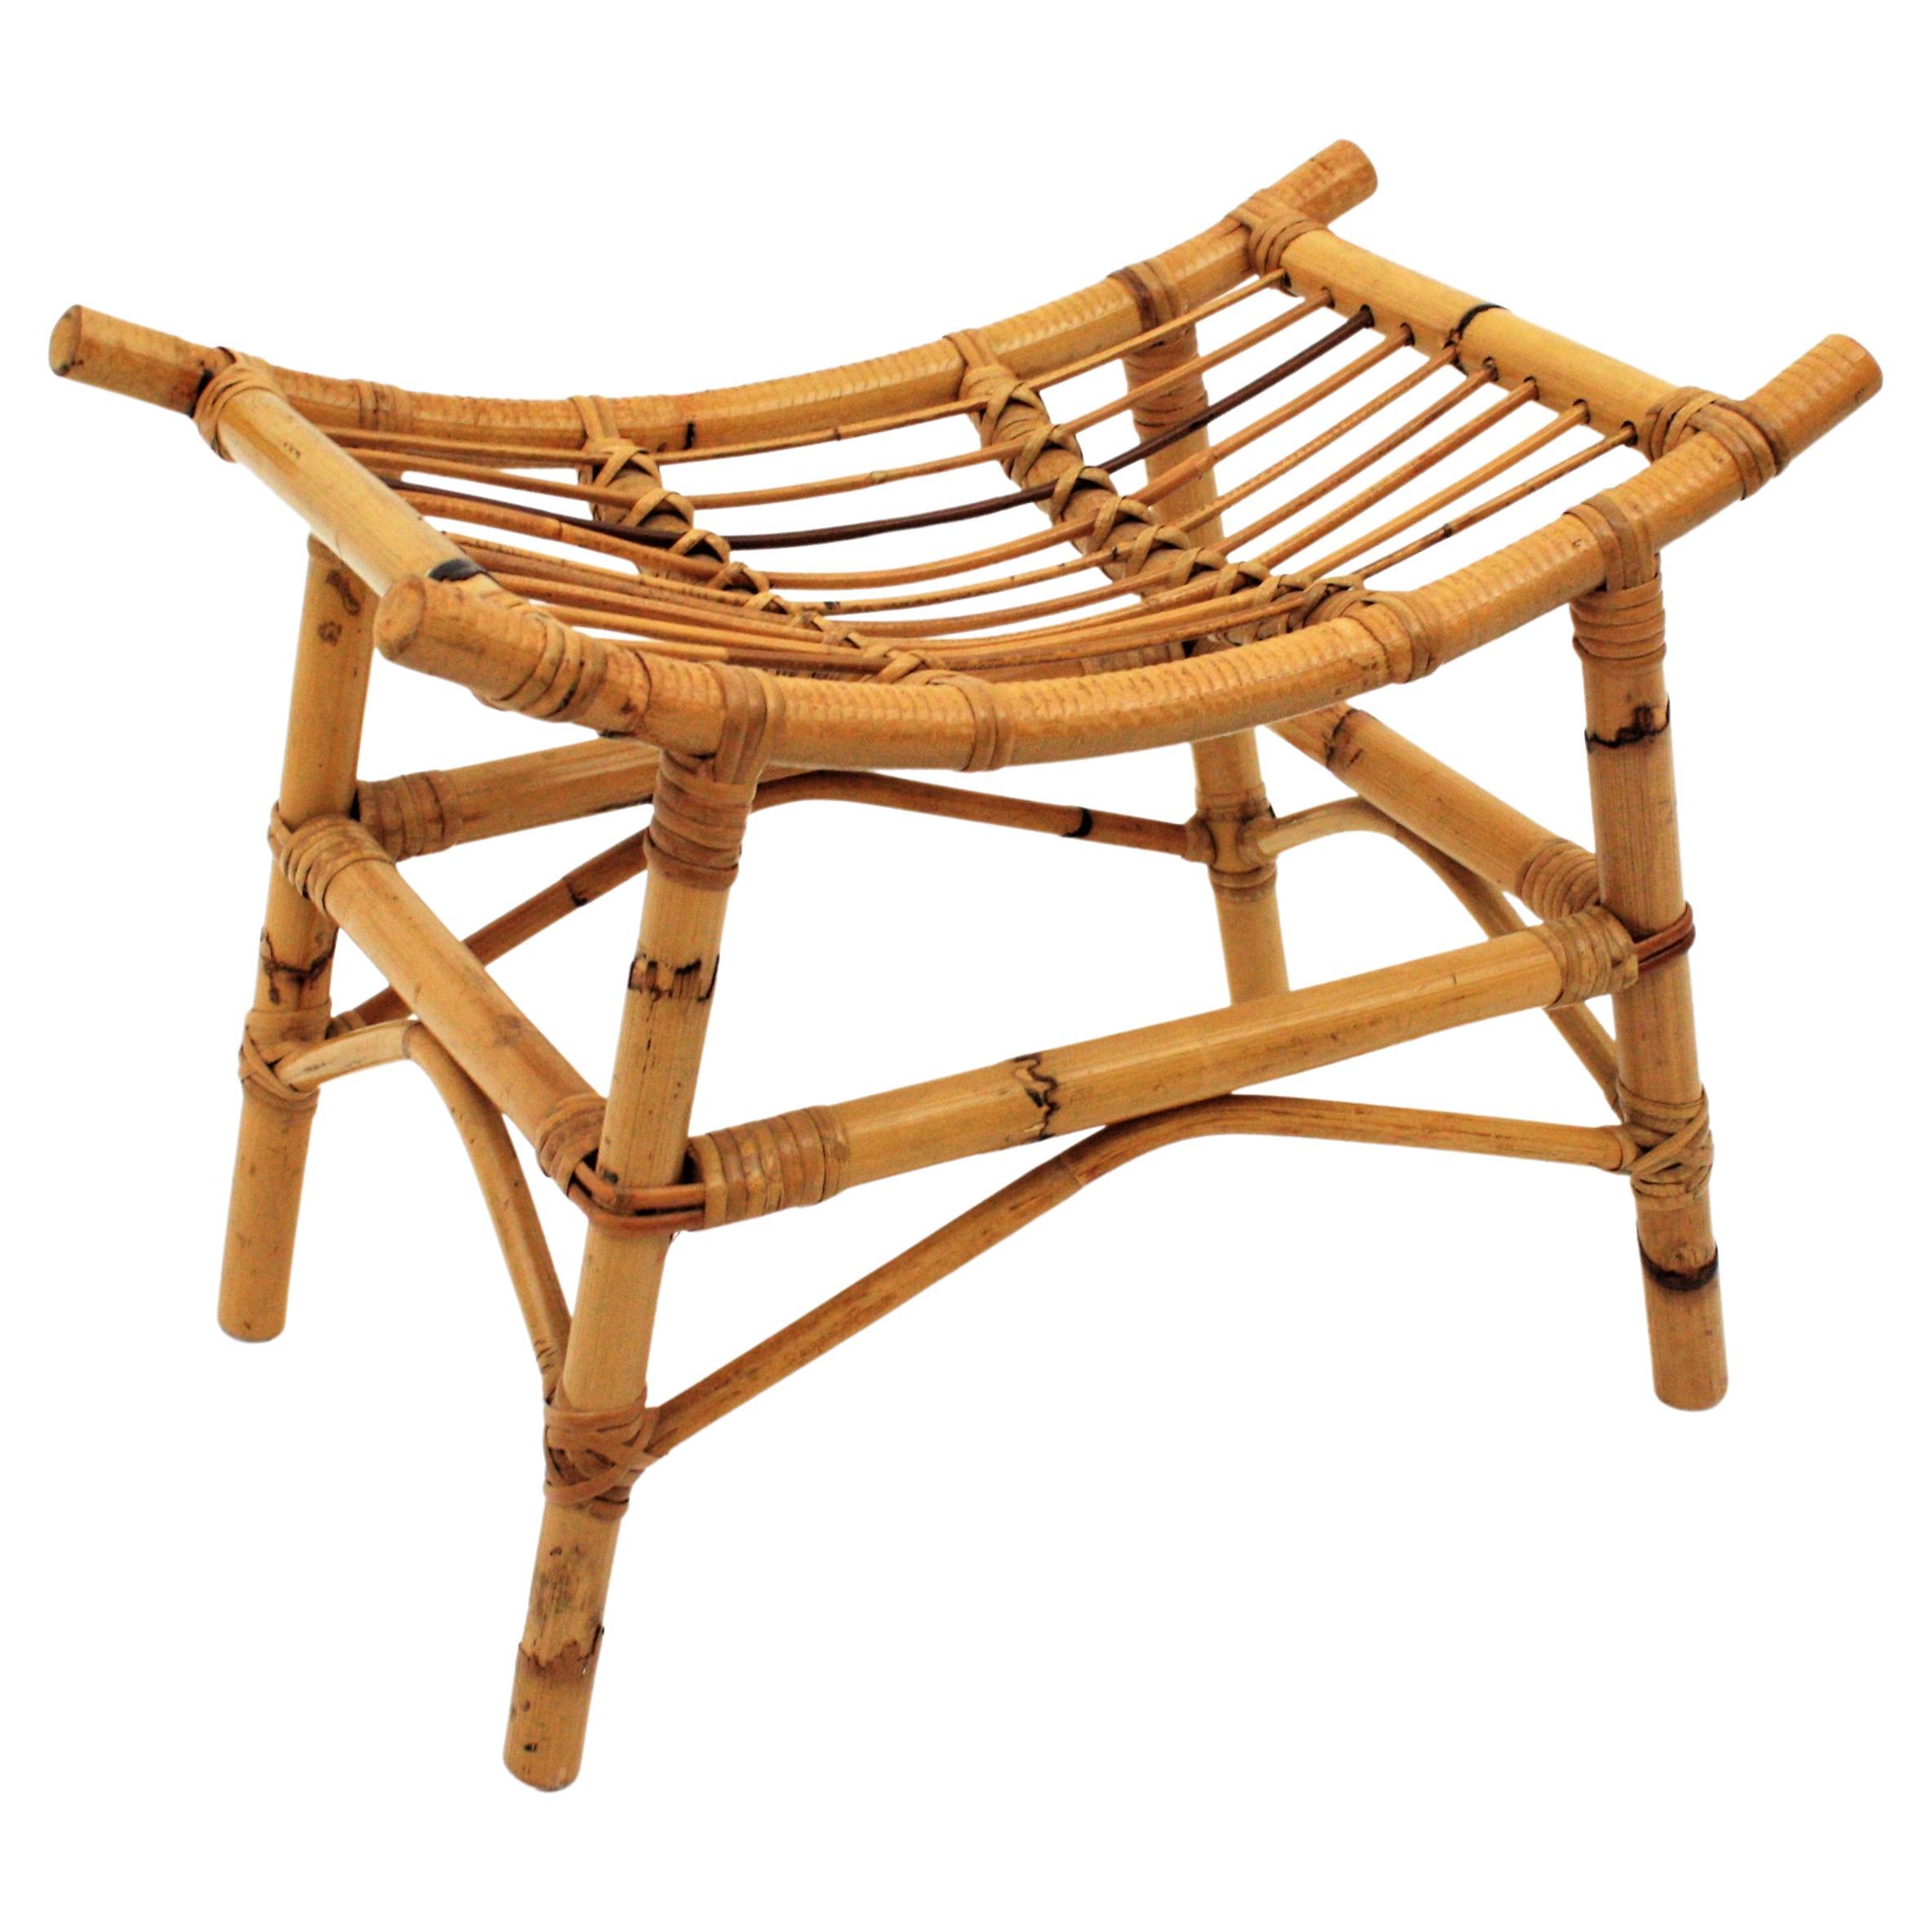 Eyecatching handcrafted bamboo and rattan stool, Spain, 1960s
This Mid-Century Modernist bamboo and rattan rectangular stool or small bench was handcrafted in Spain near 1960s.
Very well constructed it is all made by hand with a bamboo and rattan